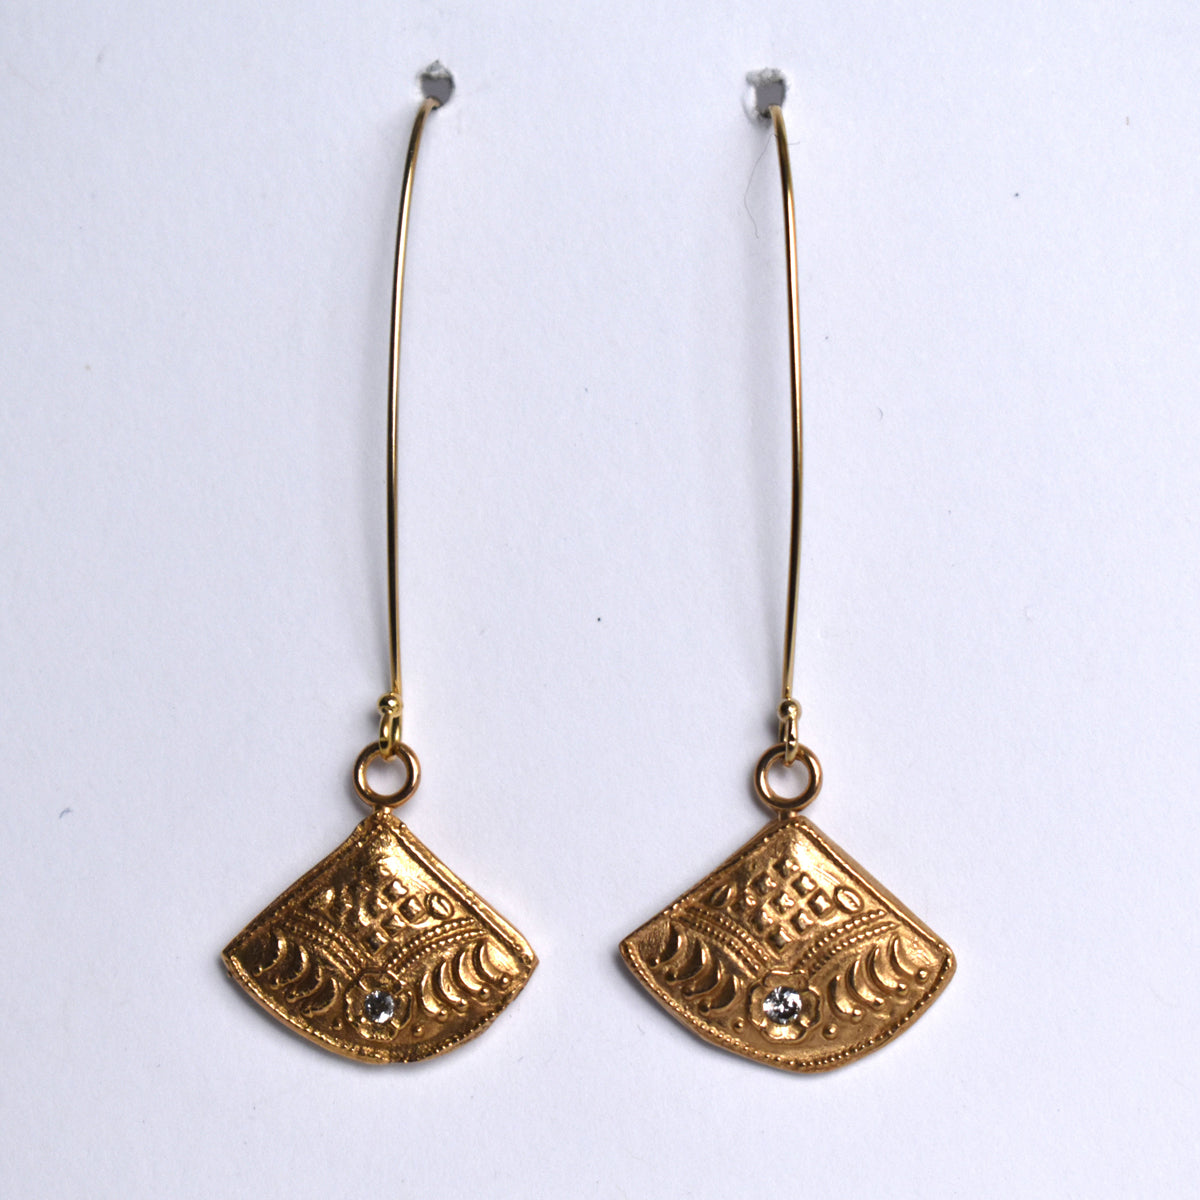 Handformed bronze with CZ on gold-filled wire earrings